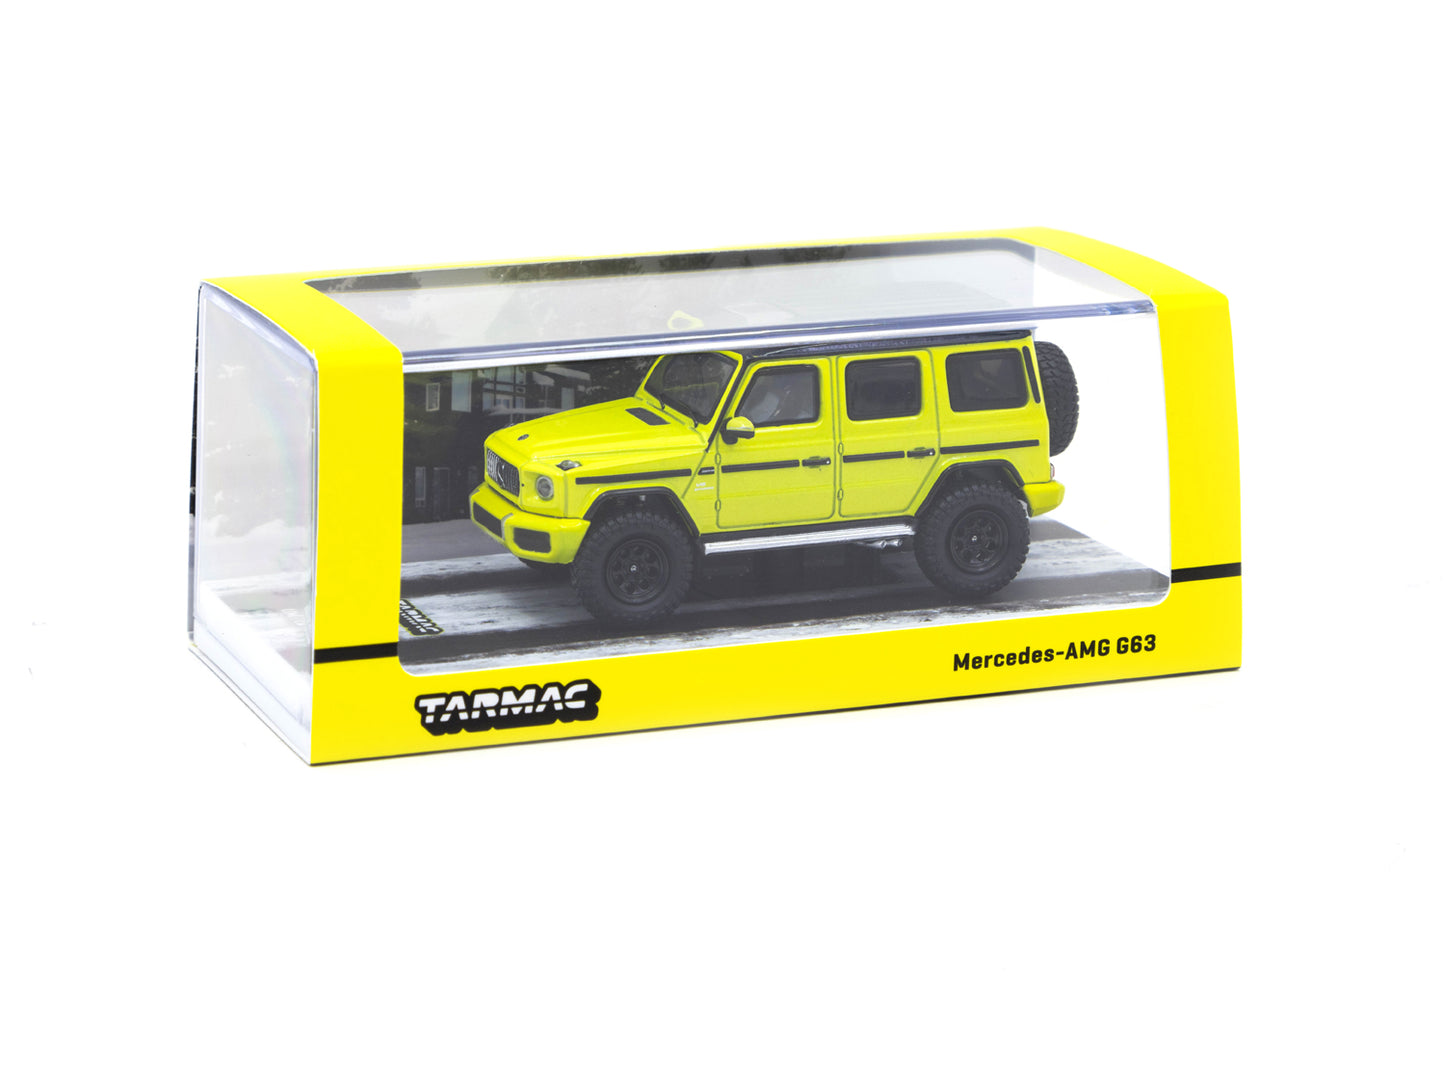 Tarmac Works 1:64 Scale Mercedes-AMG G63
ELECTRIC BEAM/YELLOW
*** Special Edition ***